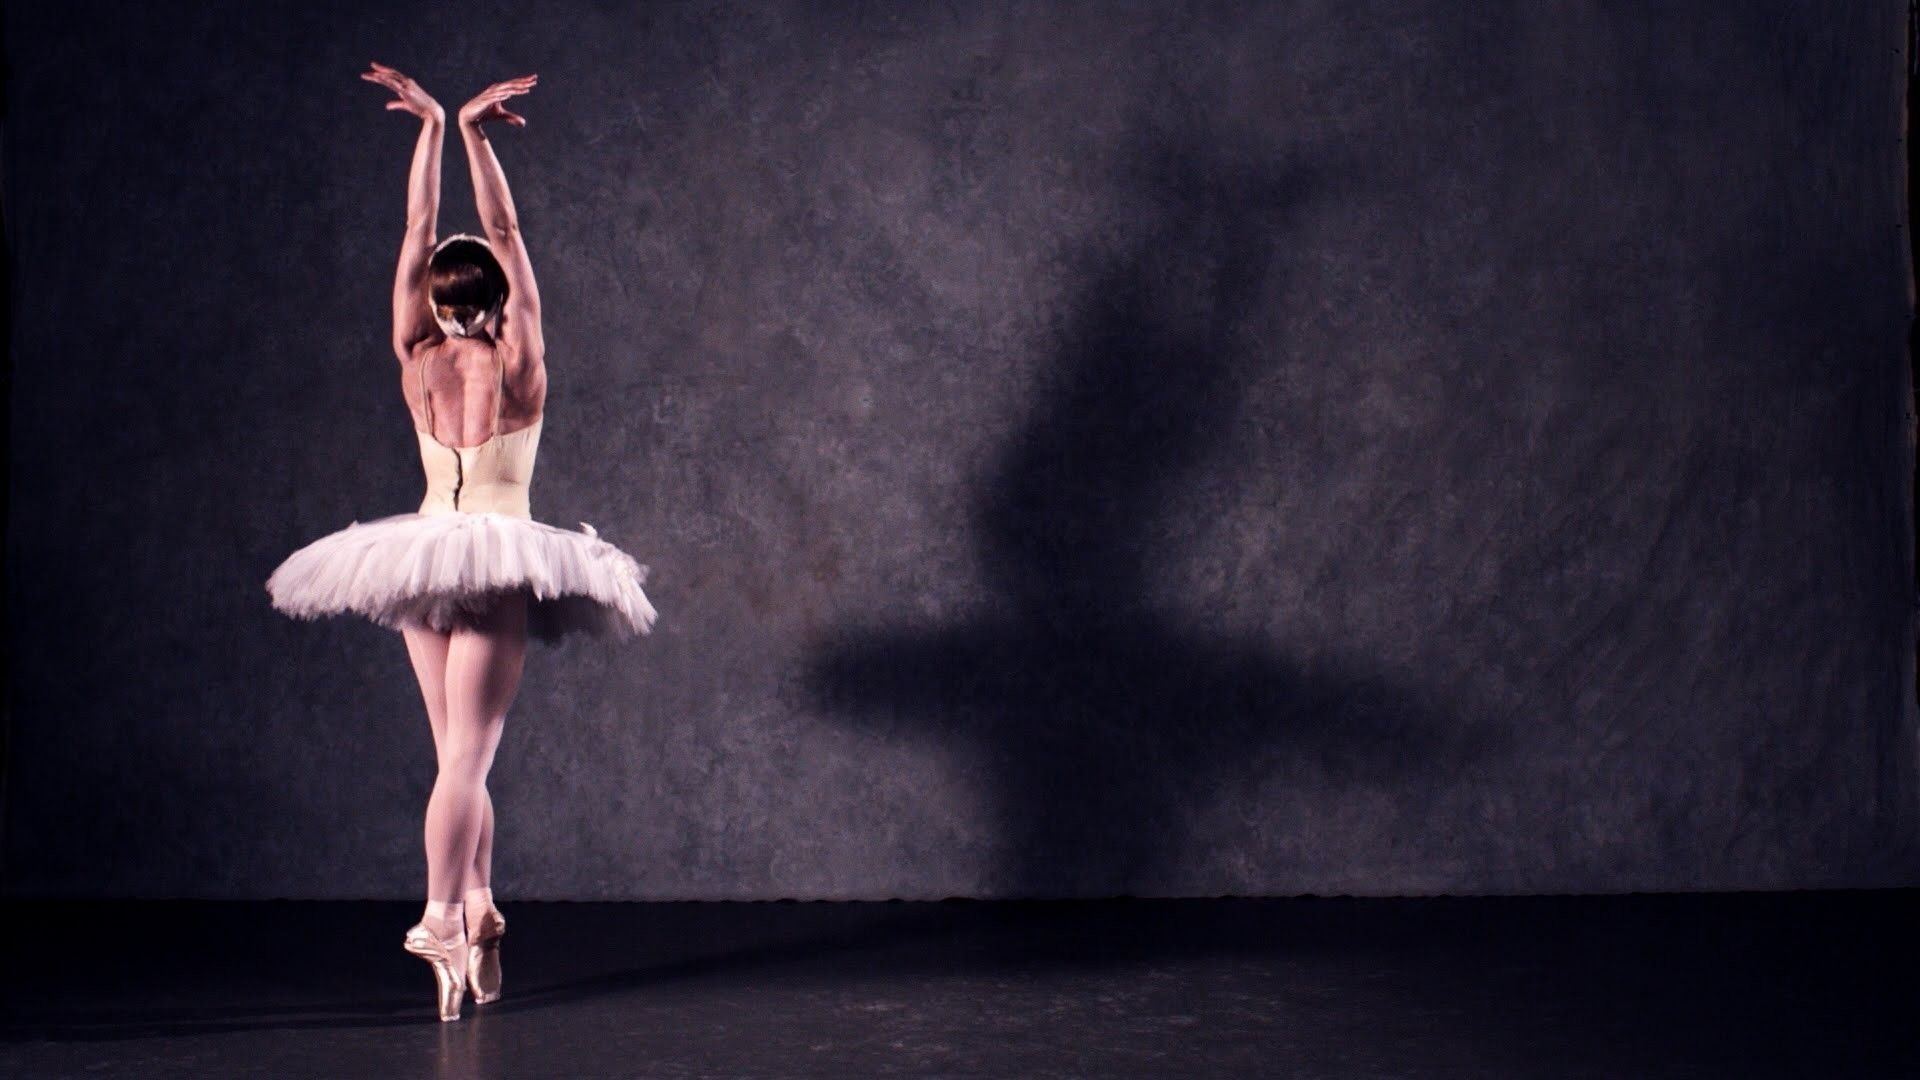 Ballet: Theatrical dance in which a formal academic dance technique is combined with other artistic elements. 1920x1080 Full HD Wallpaper.